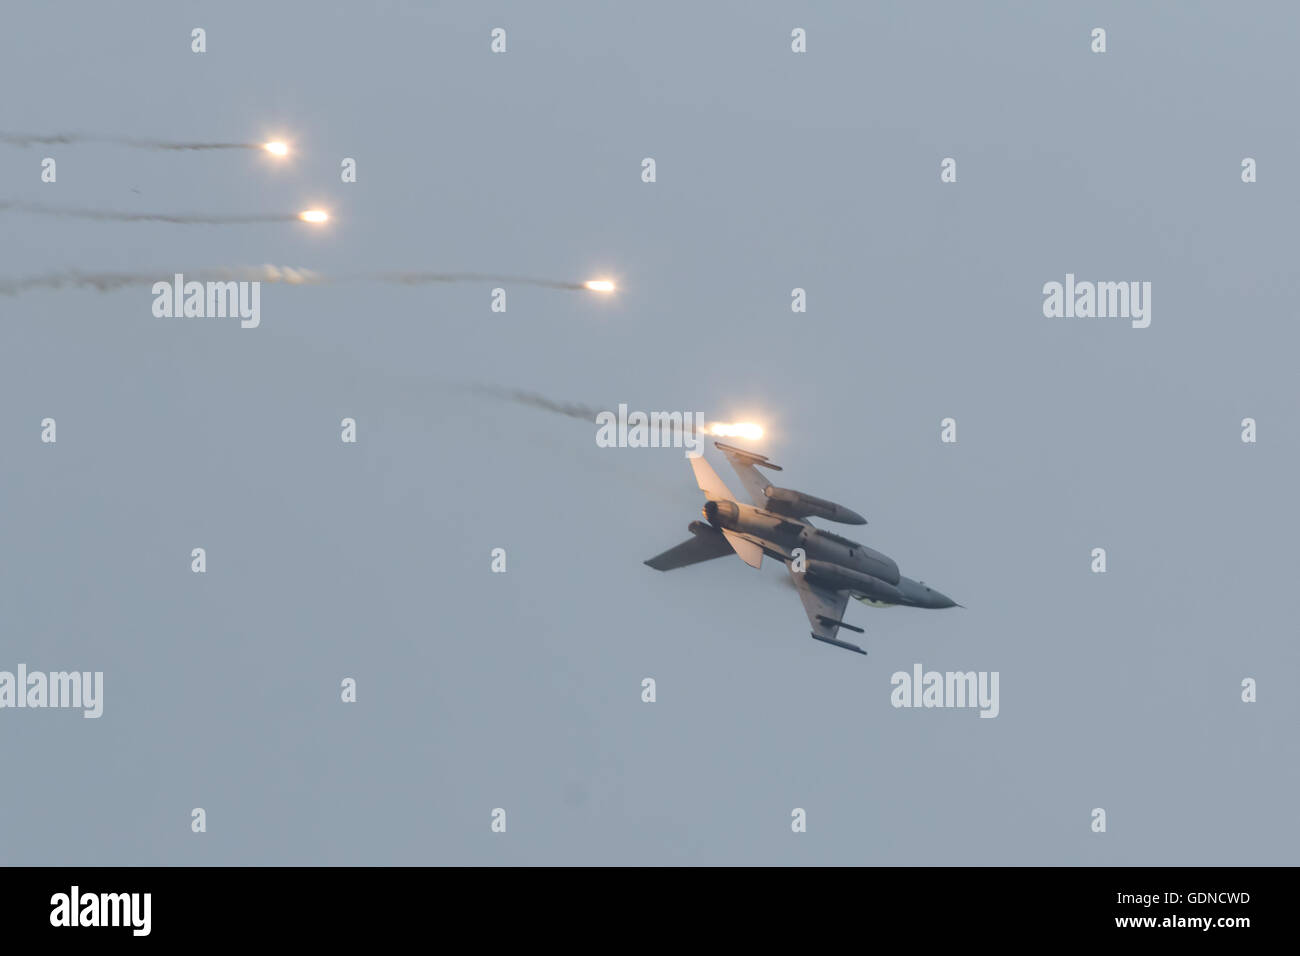 F-16AM Fighting Falcon shooting flares Stock Photo